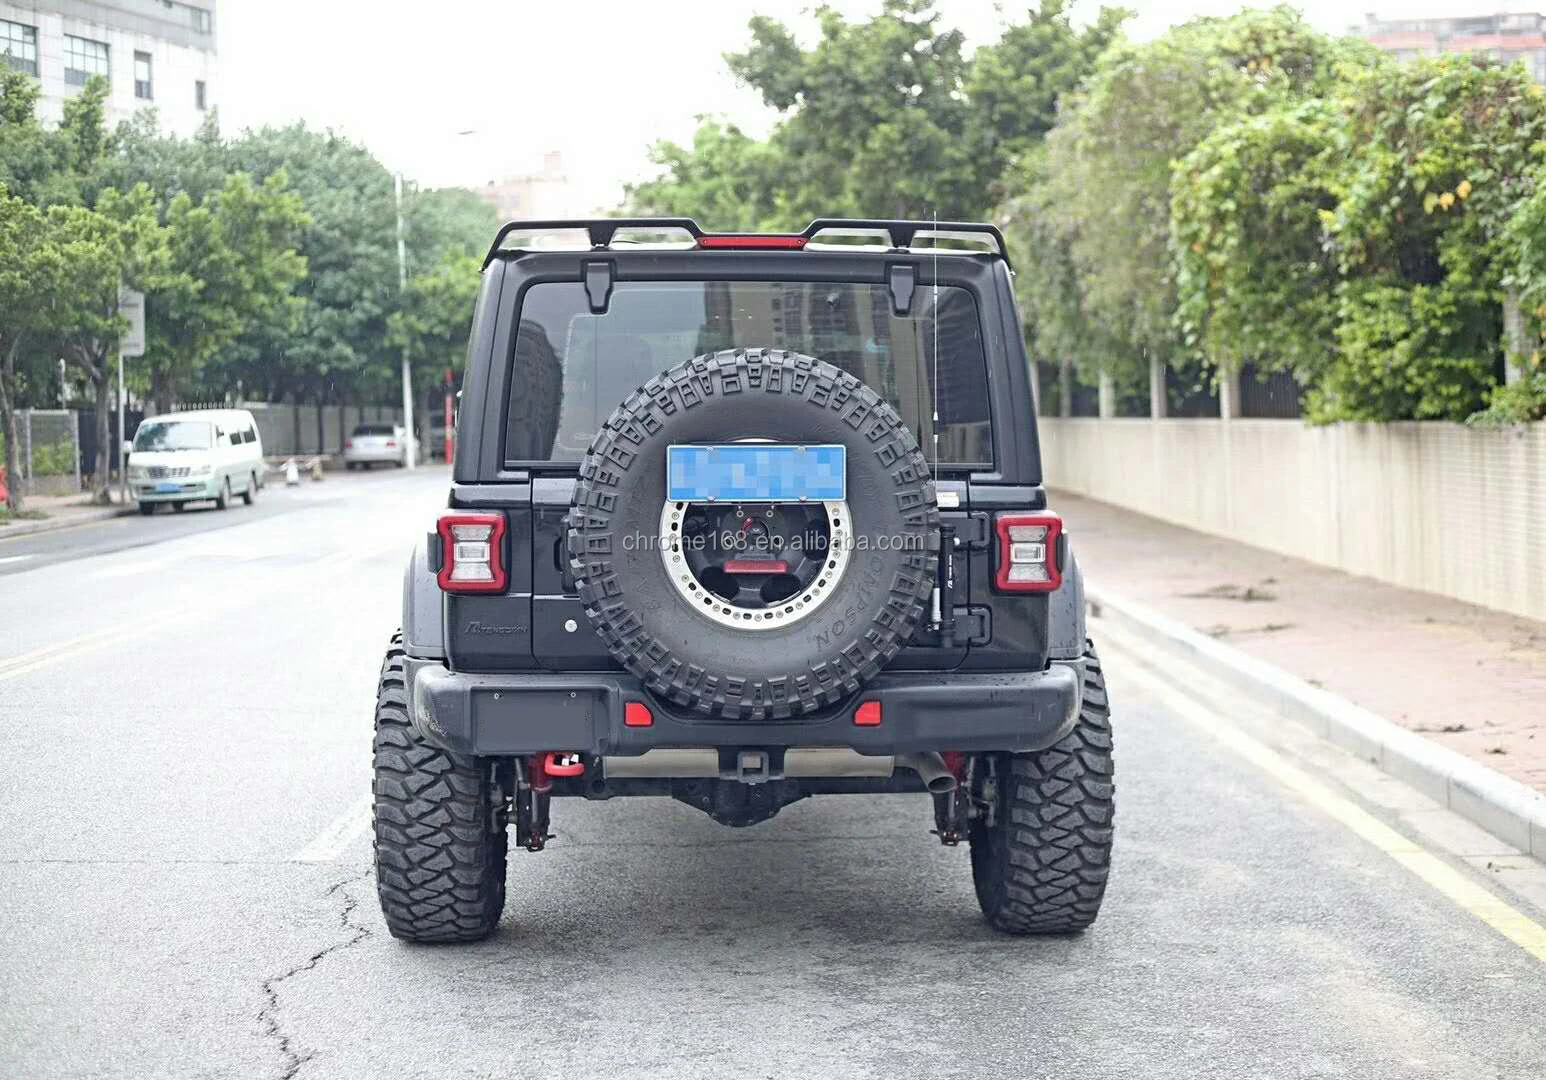 4x4 Offroad Rear Spoiler With Led Light For Jeep Wrangler Jk/jl Sahara Abs  Roof Wing Rear Spoiler - Buy Rear Spoiler For Jeep Wrangler Jk/jl,Roof Wing  For Jeep Wrangler Jk/jl,Rear Spoiler With